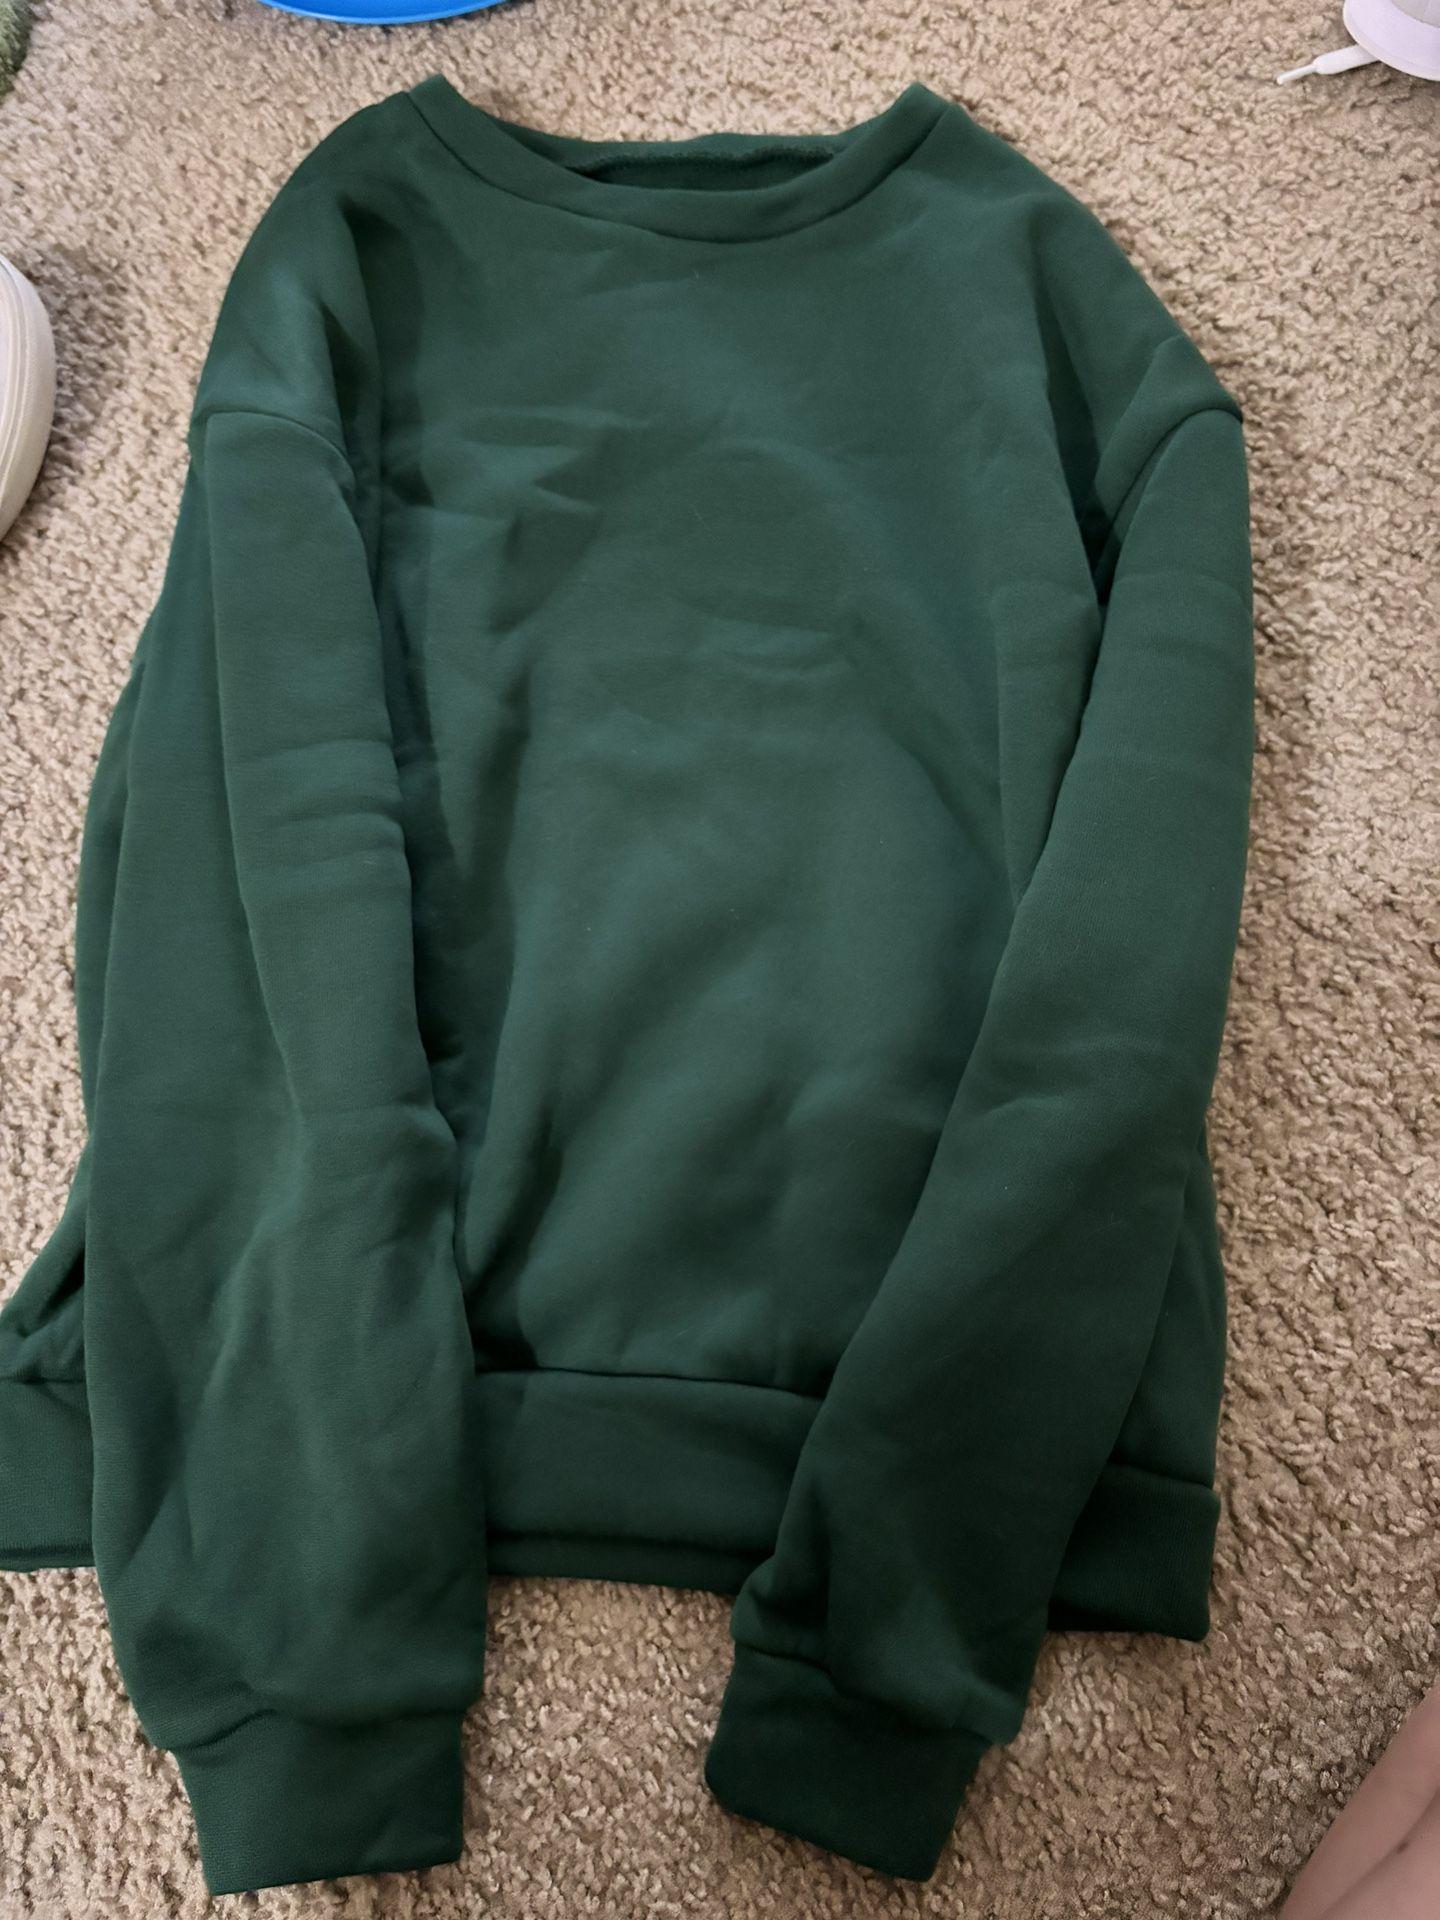 All Green Sweater